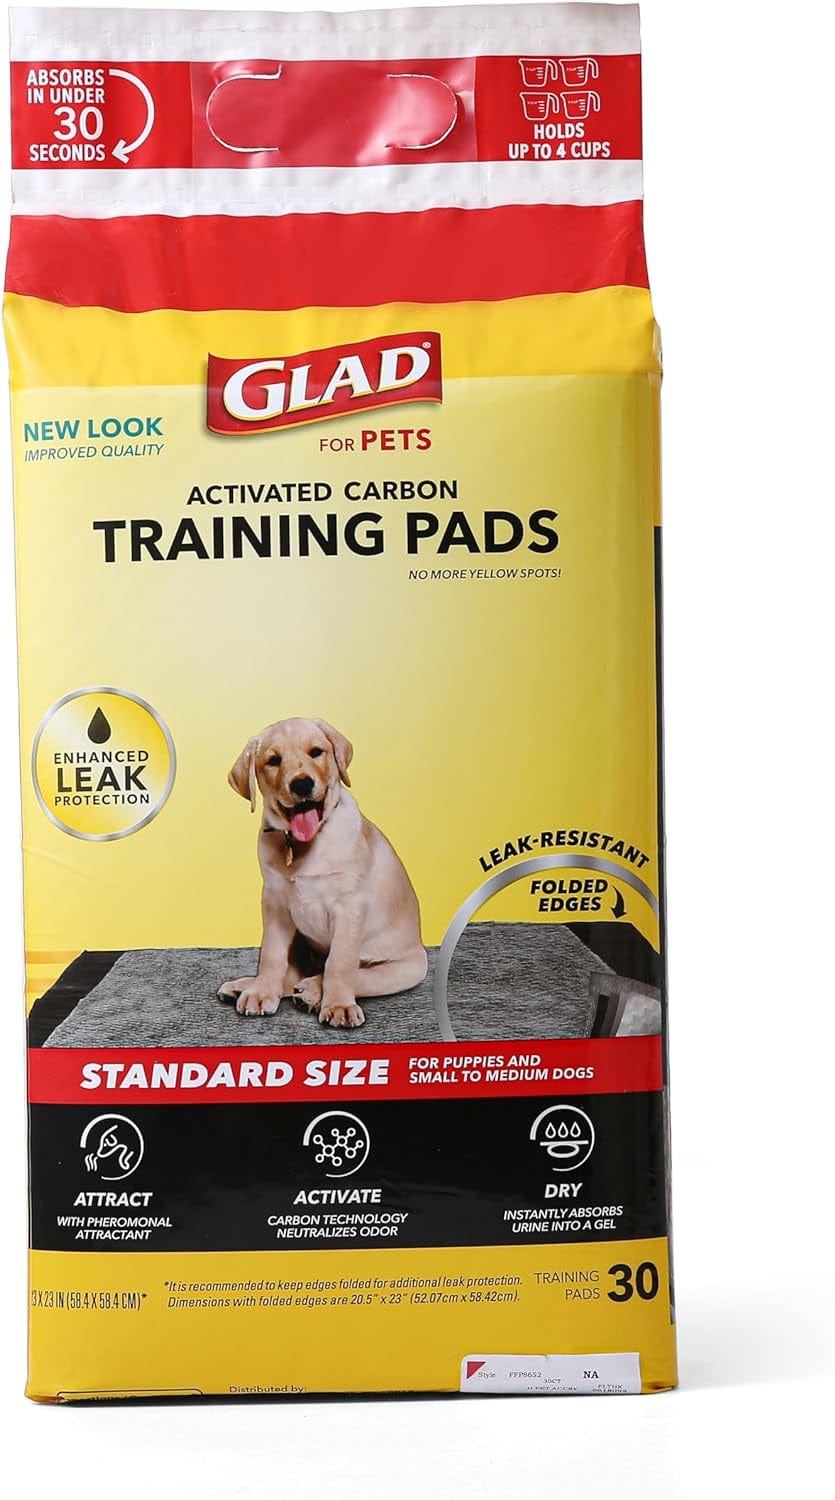 Glad for Pets Black Charcoal Puppy Pads | Puppy Potty Training Pads That ABSORB & NEUTRALIZE Urine Instantly | New & Improved Quality Dog Training Pads, 30 Count